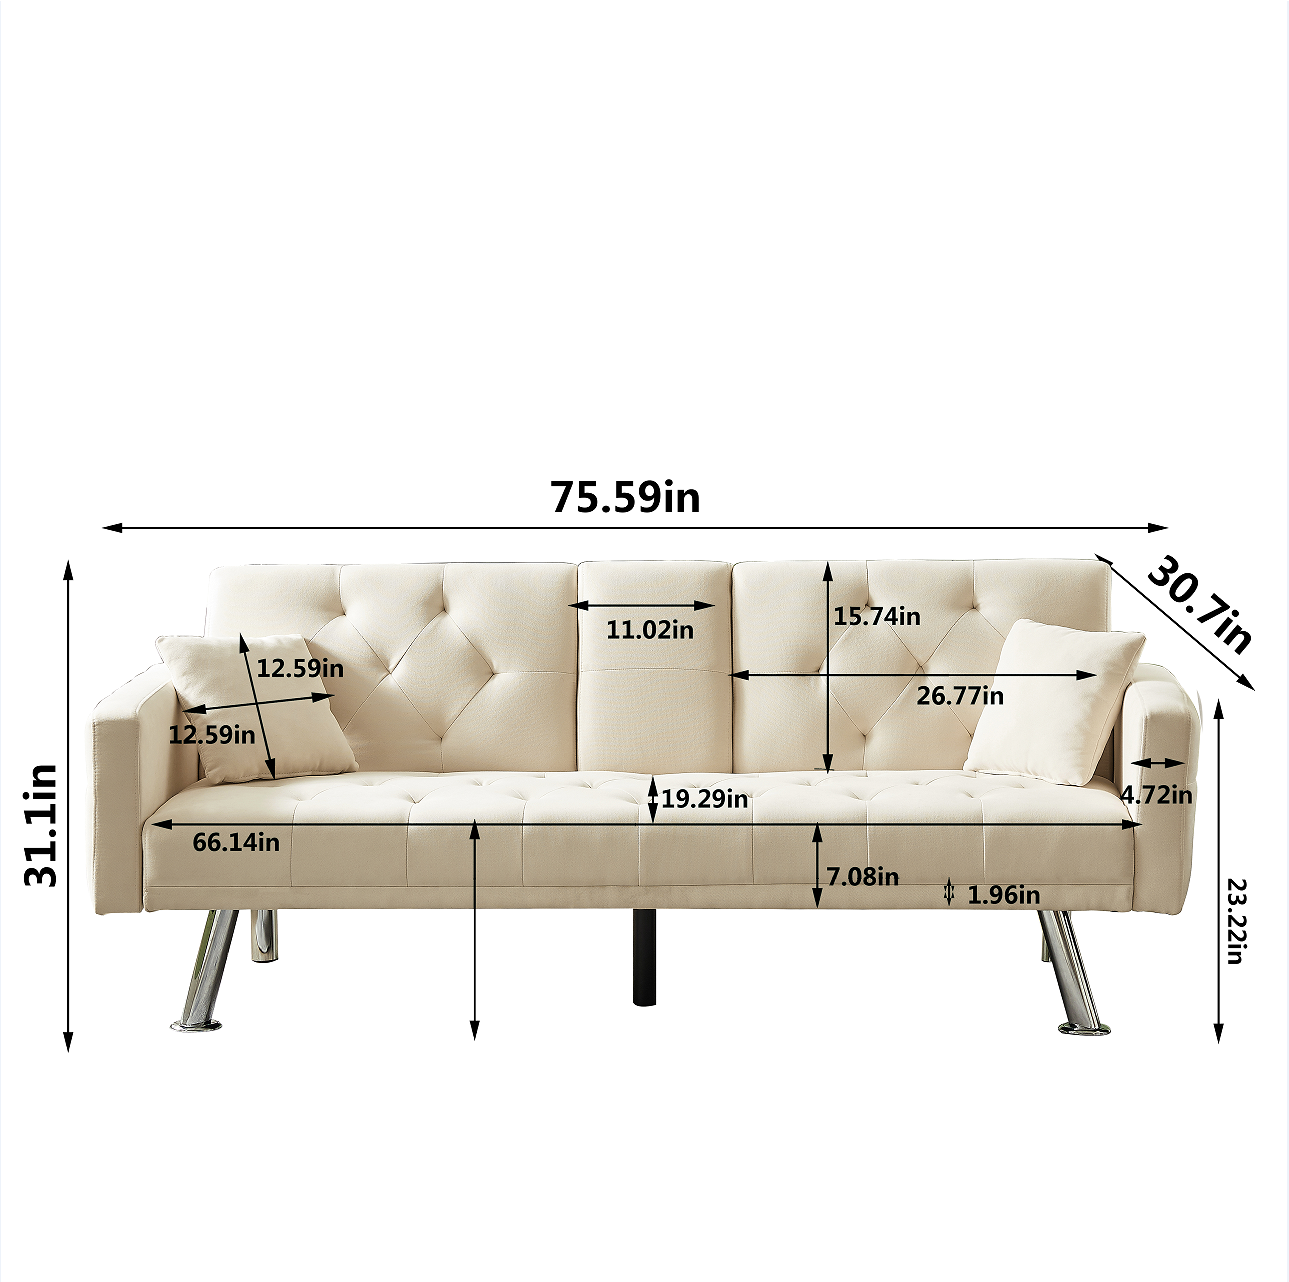 Convertible Sofa and Bed, Square Arm Armrests, Can Hold Water Cup, Two Pillow